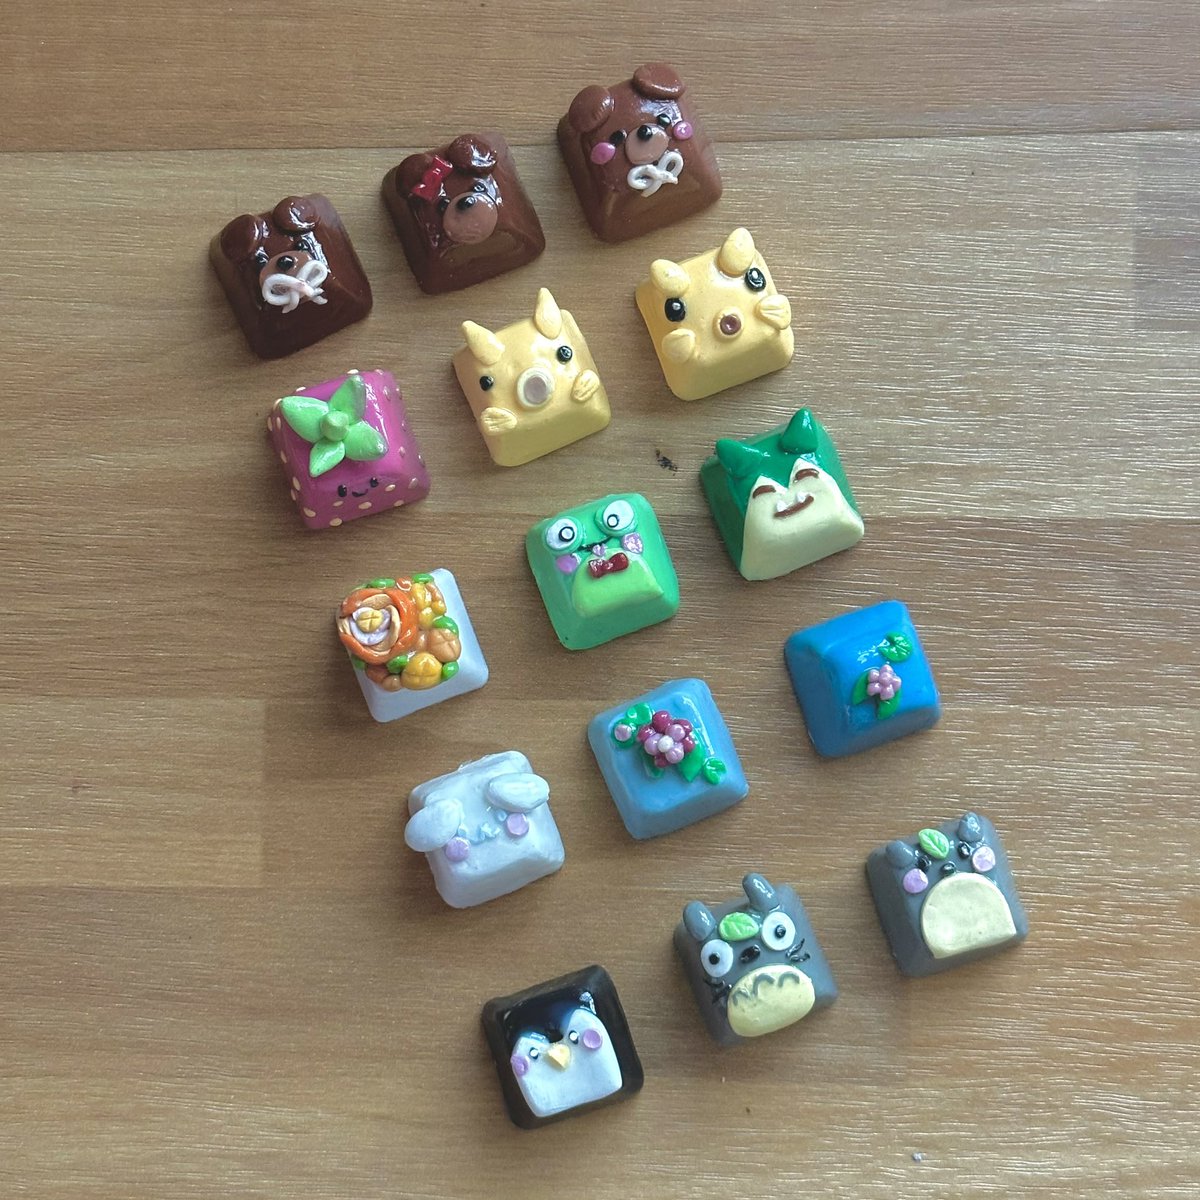 monthly update ive been making keycaps tadaaa will see u all again next month with a new hobby that i made into my whole personality !! <3